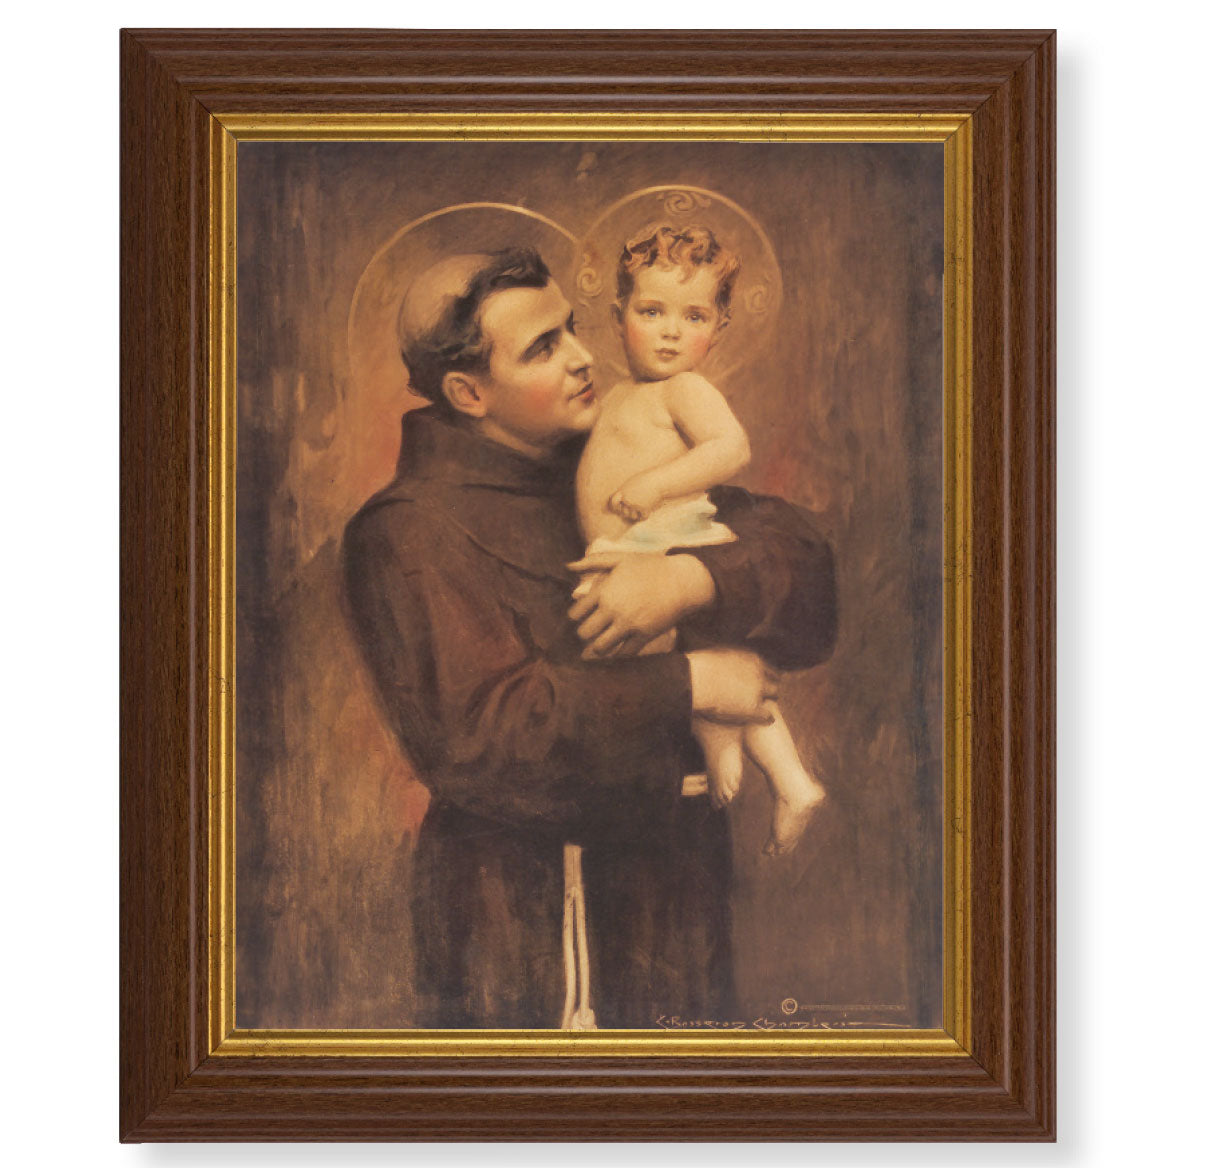 St. Anthony with Jesus Picture Framed Wall Art Decor, Large, Traditional Dark Walnut Fluted Frame with Gold Beaded Lip